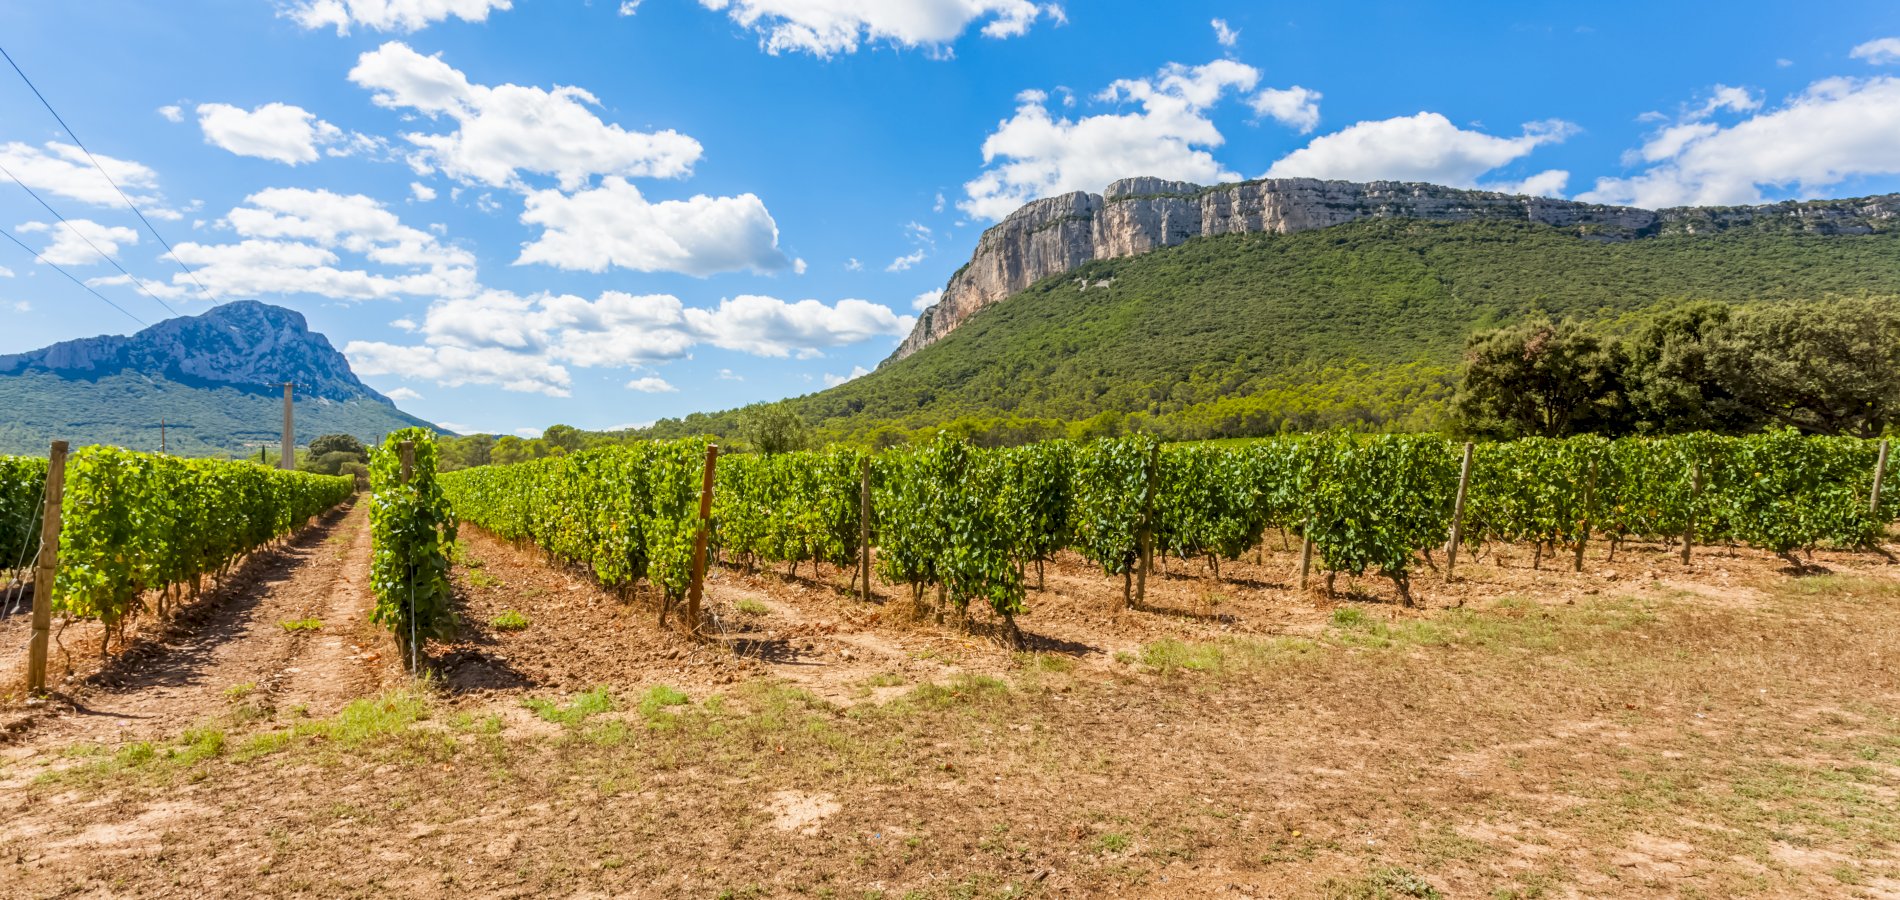 Ophorus Tours - Languedoc Wine Tour & Oyster Tasting Half Day Trip from Montpellier